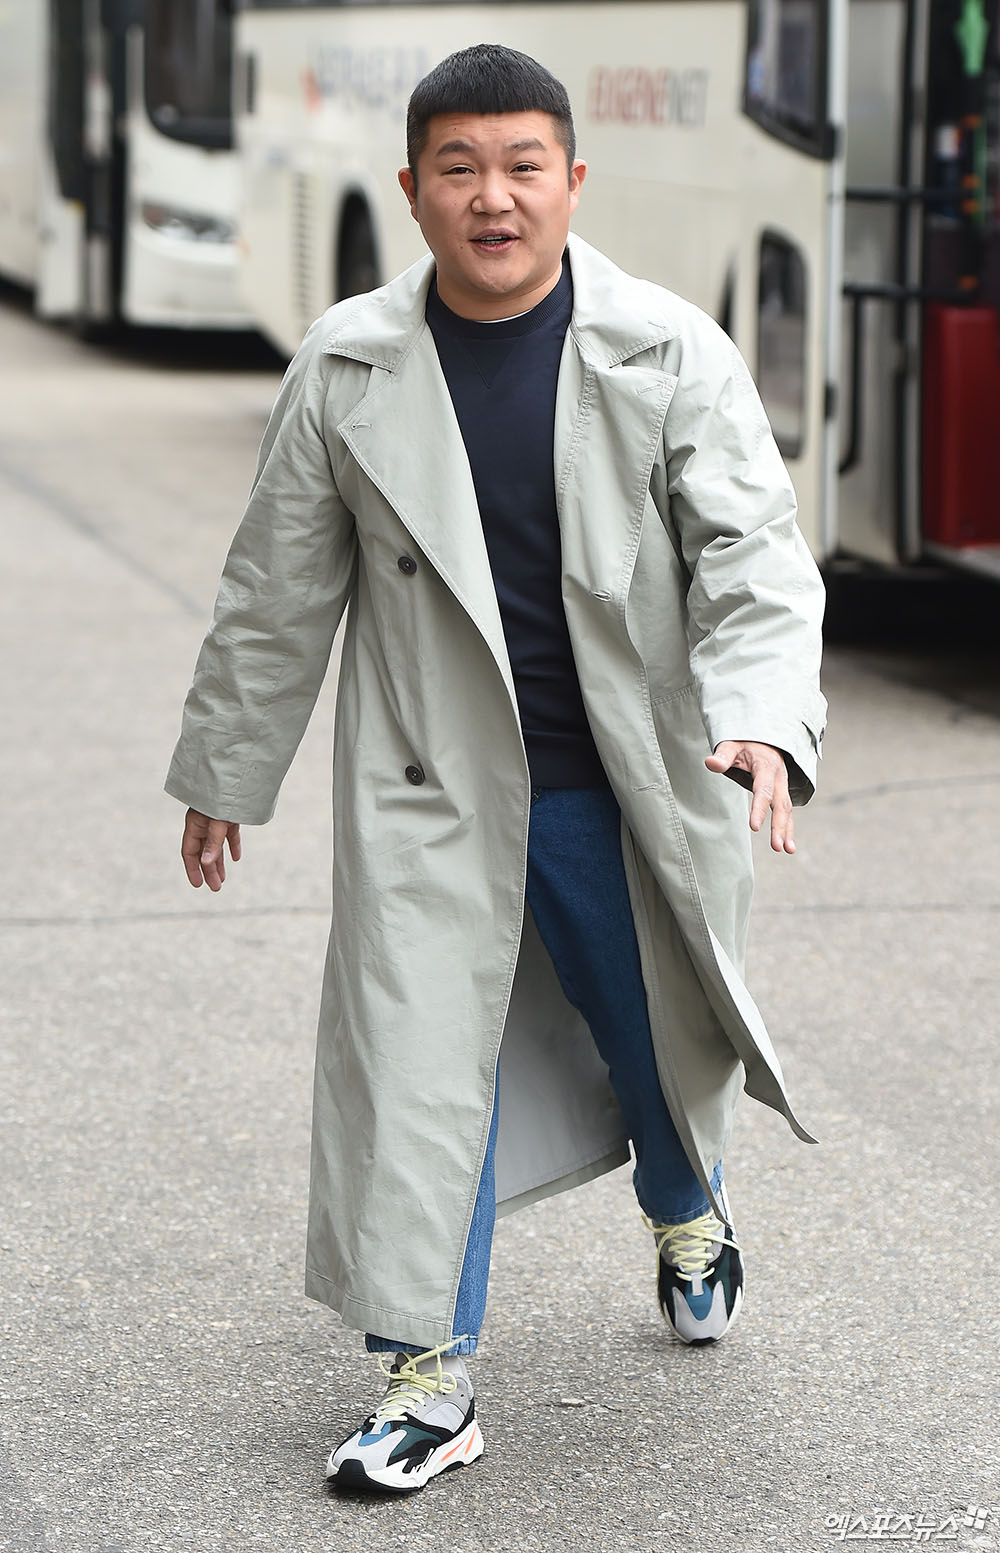 Actor Jo Se-ho, who attended the KBS 2TV Happy Together 4 recording at the KBS annex in Yeouido-dong, Seoul on the afternoon of the 6th, is posing on his way to work.